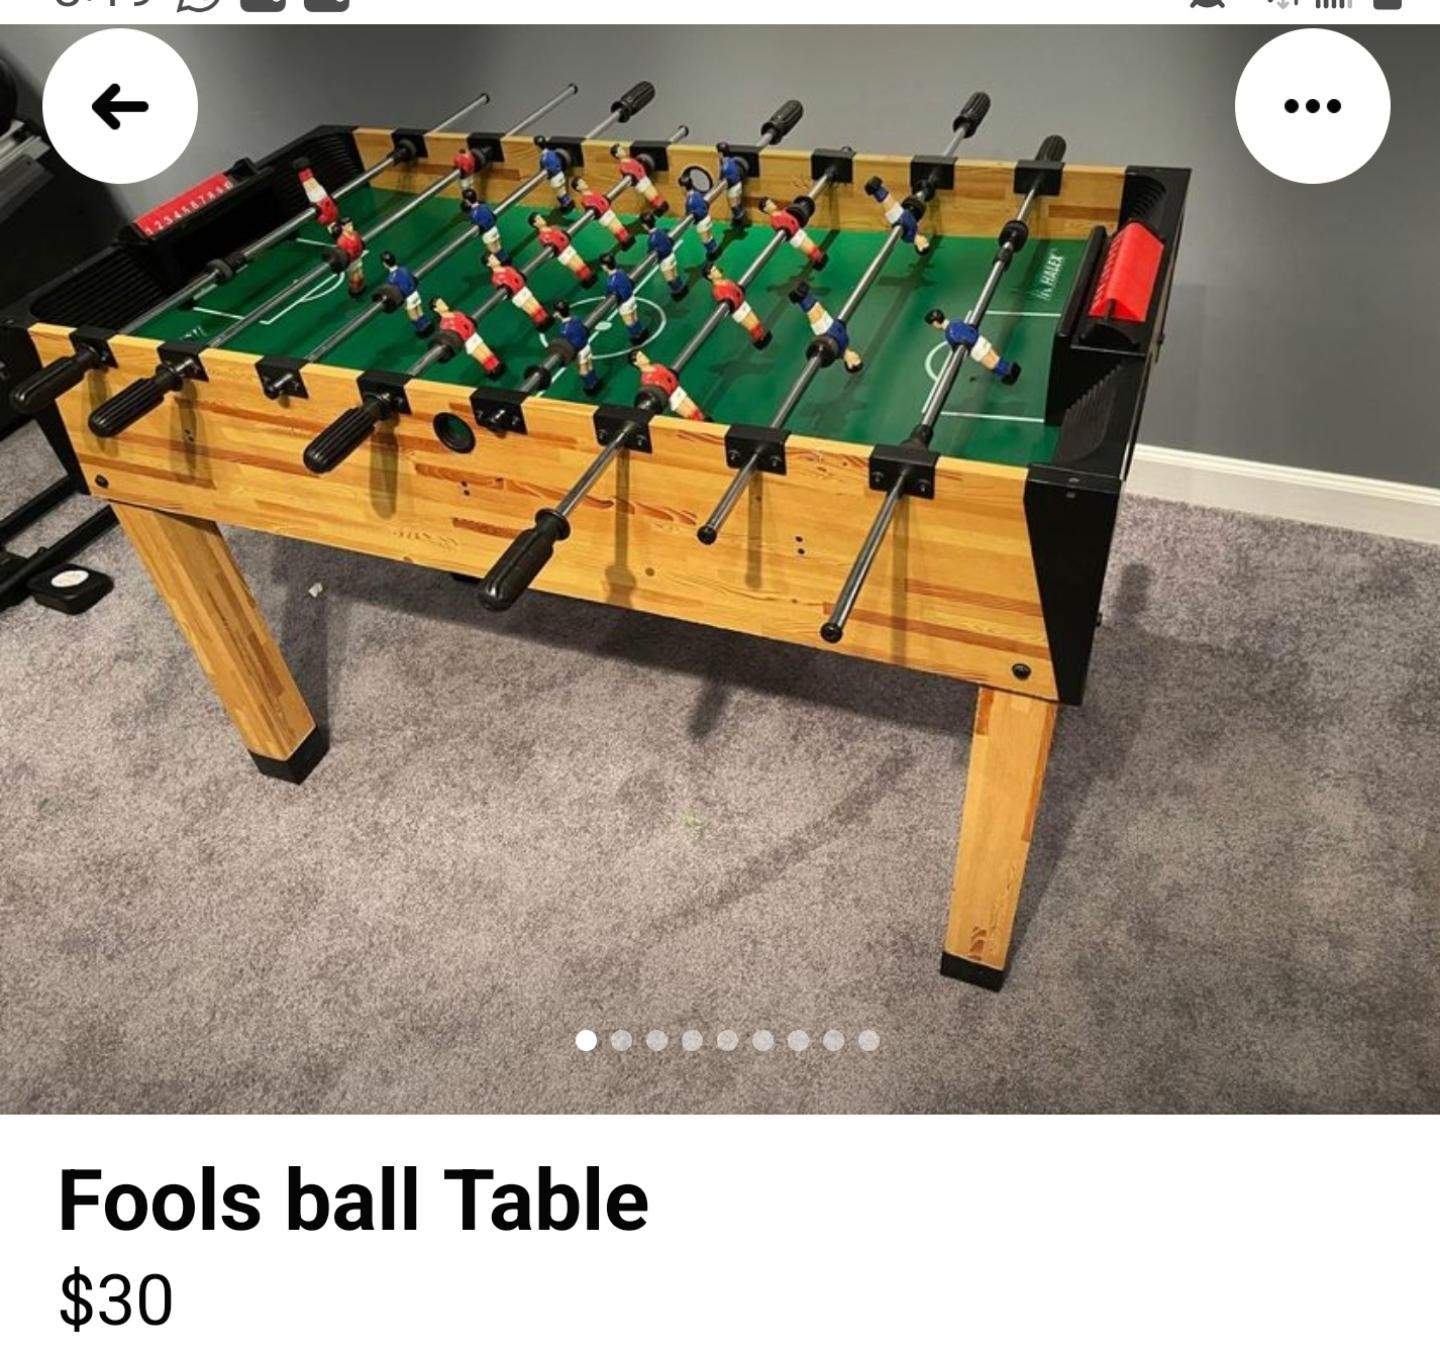 marketplace ad reading fools ball table